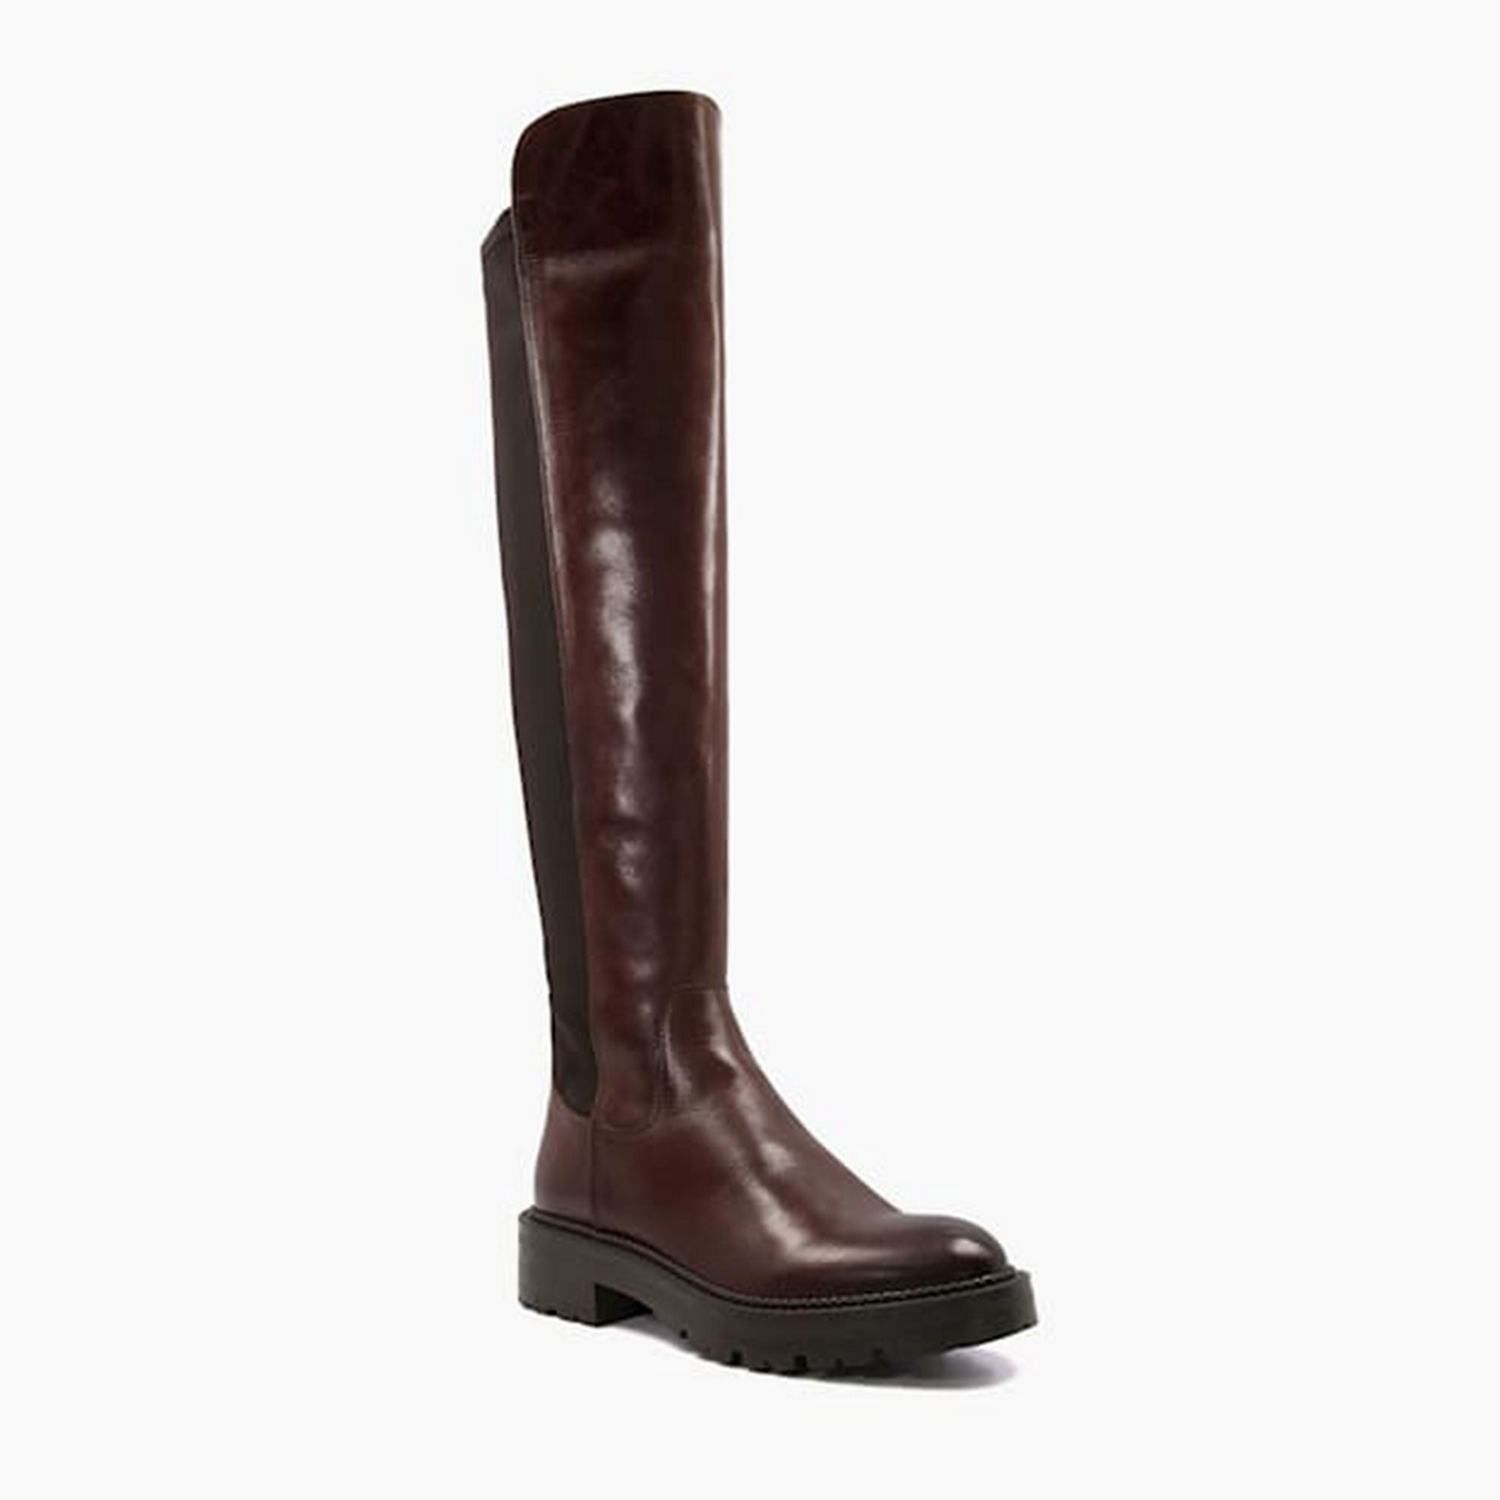 Tella Chunky Leather Knee-High Boots